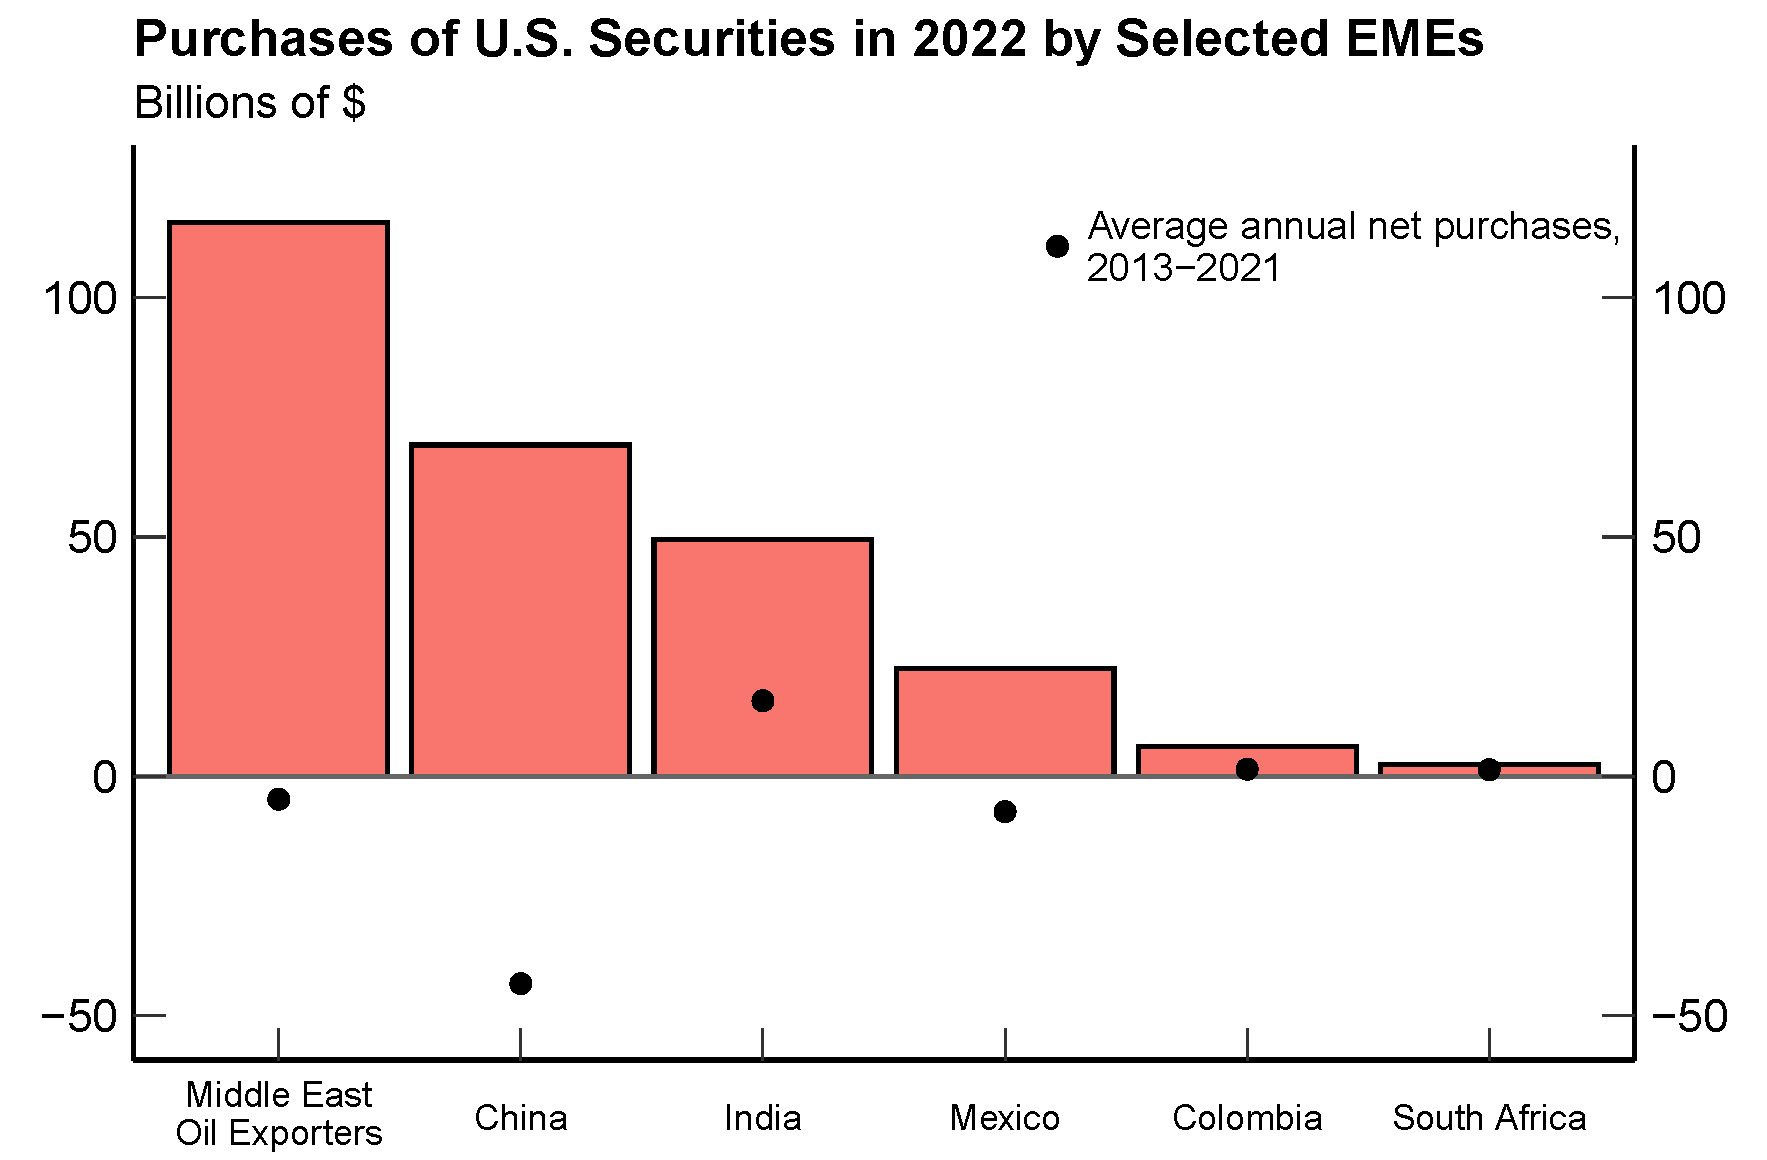 Figure 2. Purchases of U.S. Securities in 2022 by Selected EMEs. See accessible link for data.